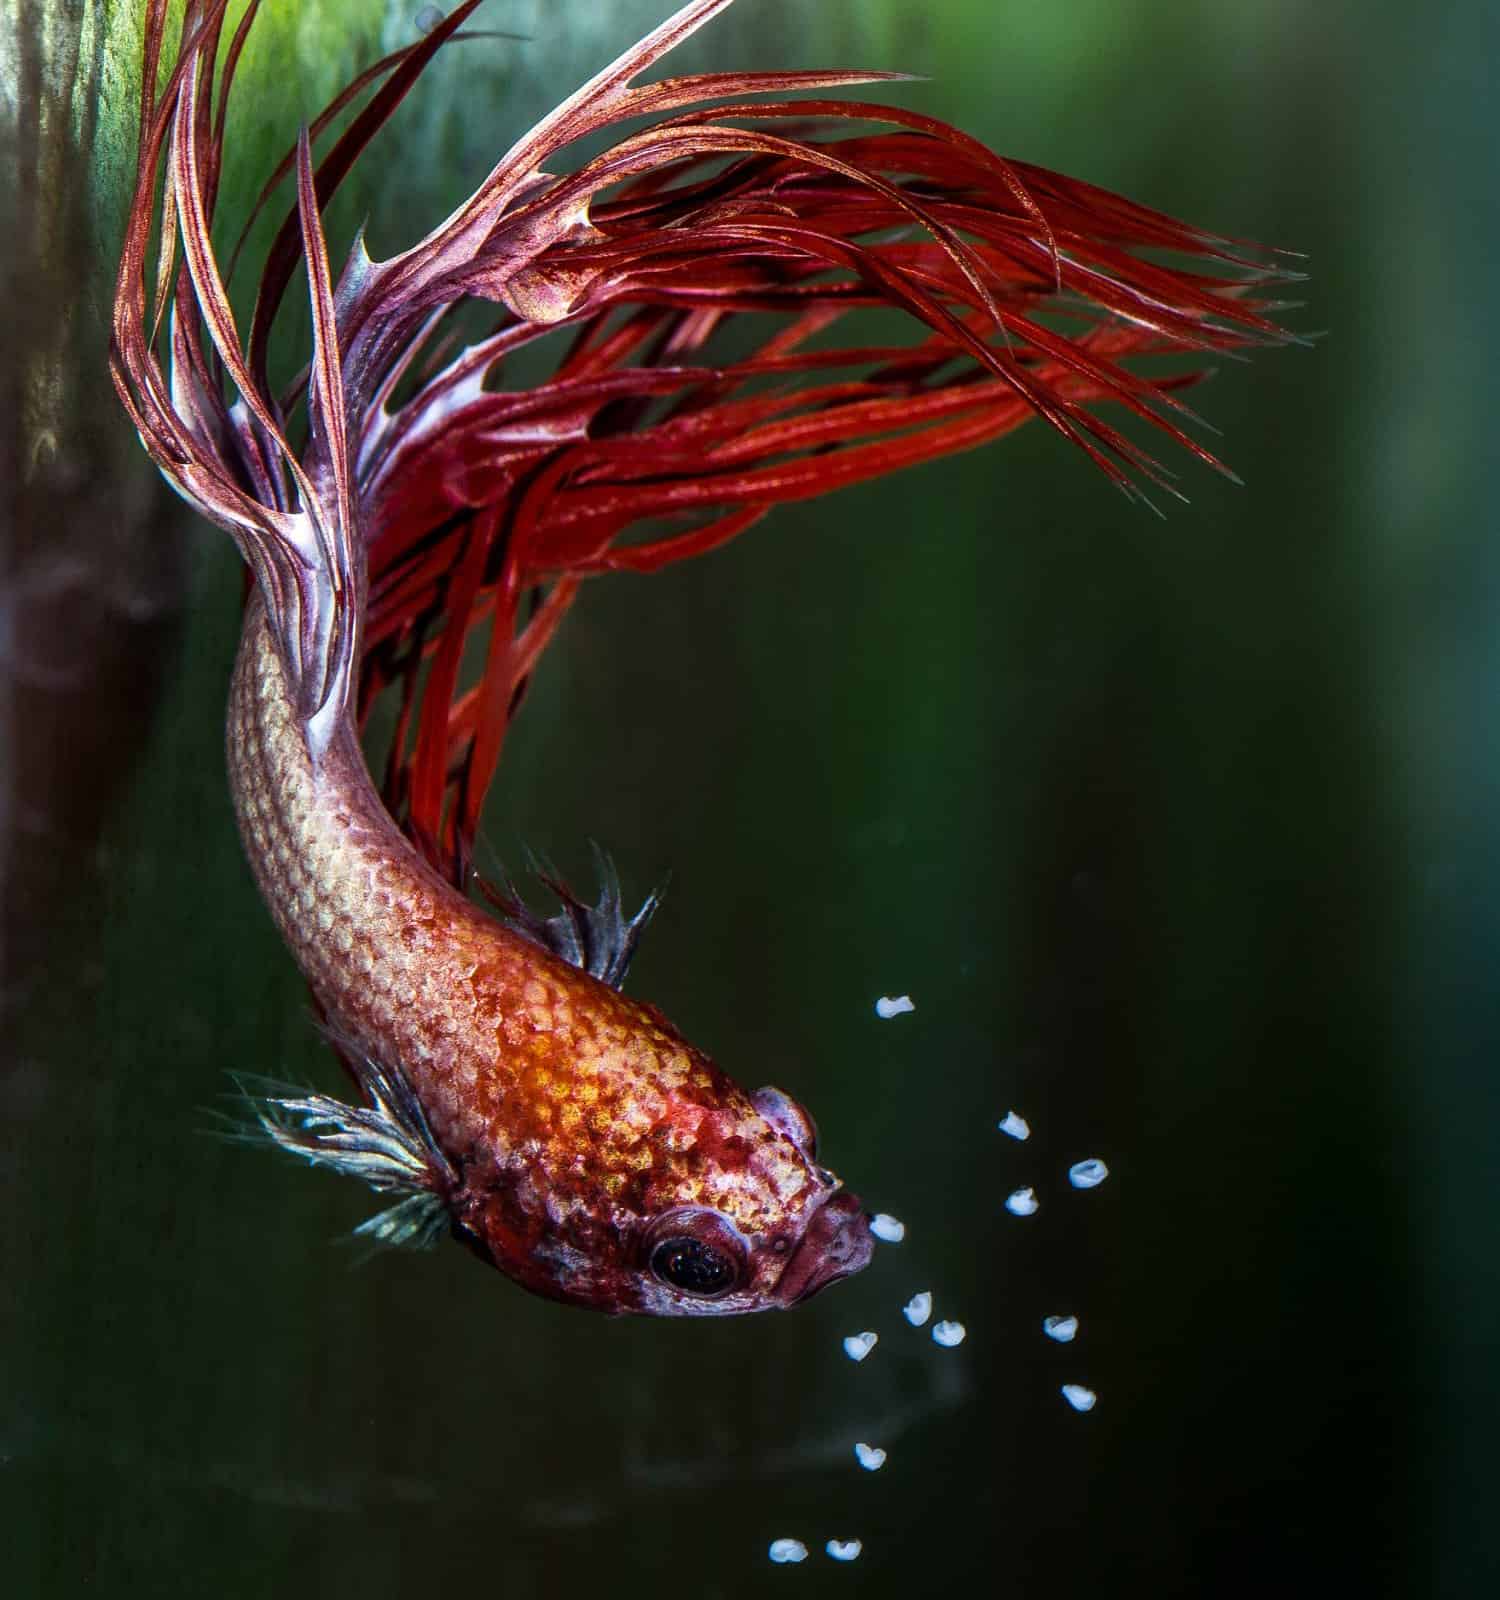 Siamese fighter (Betta splendens) male collecting falling eggs after spawning